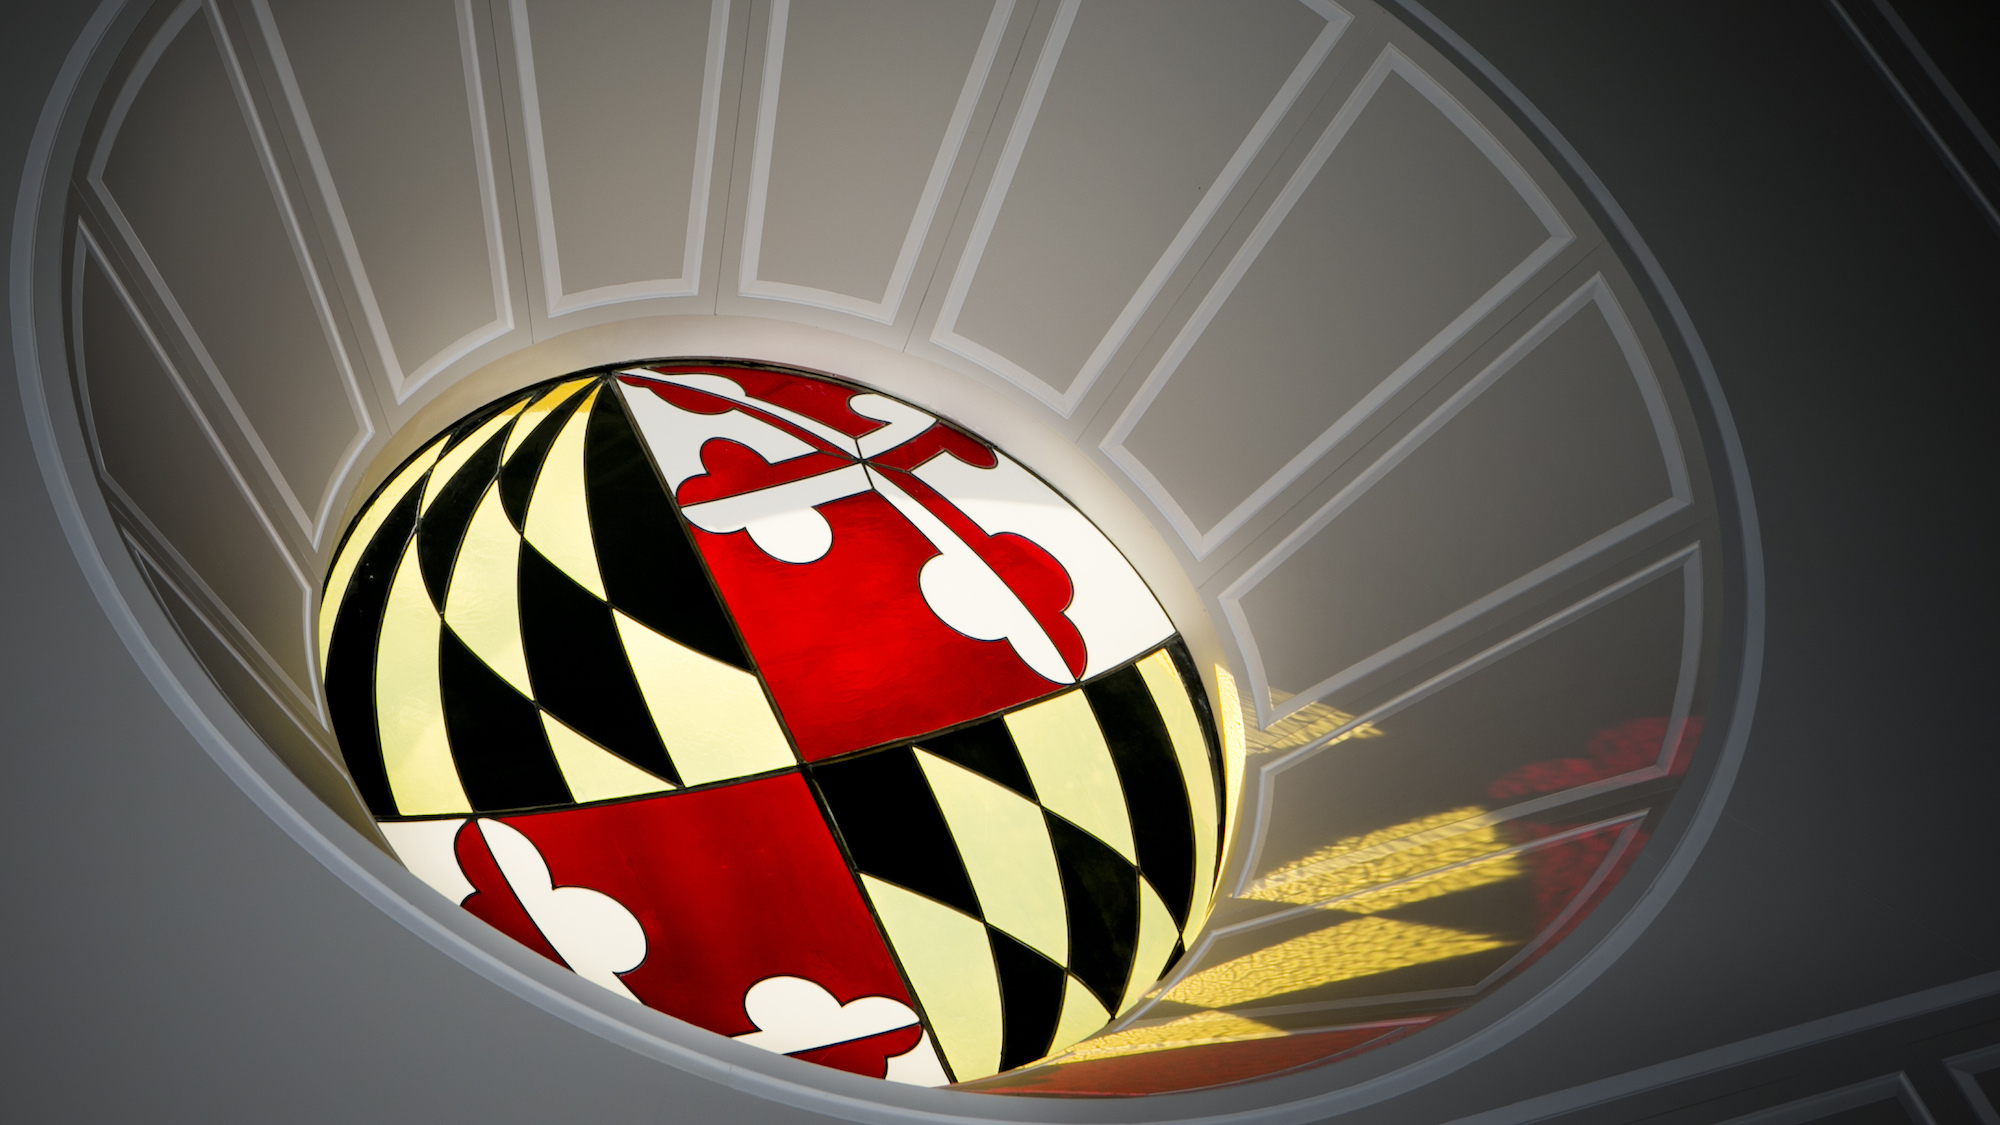 A circular stained glass window of the Maryland state flag